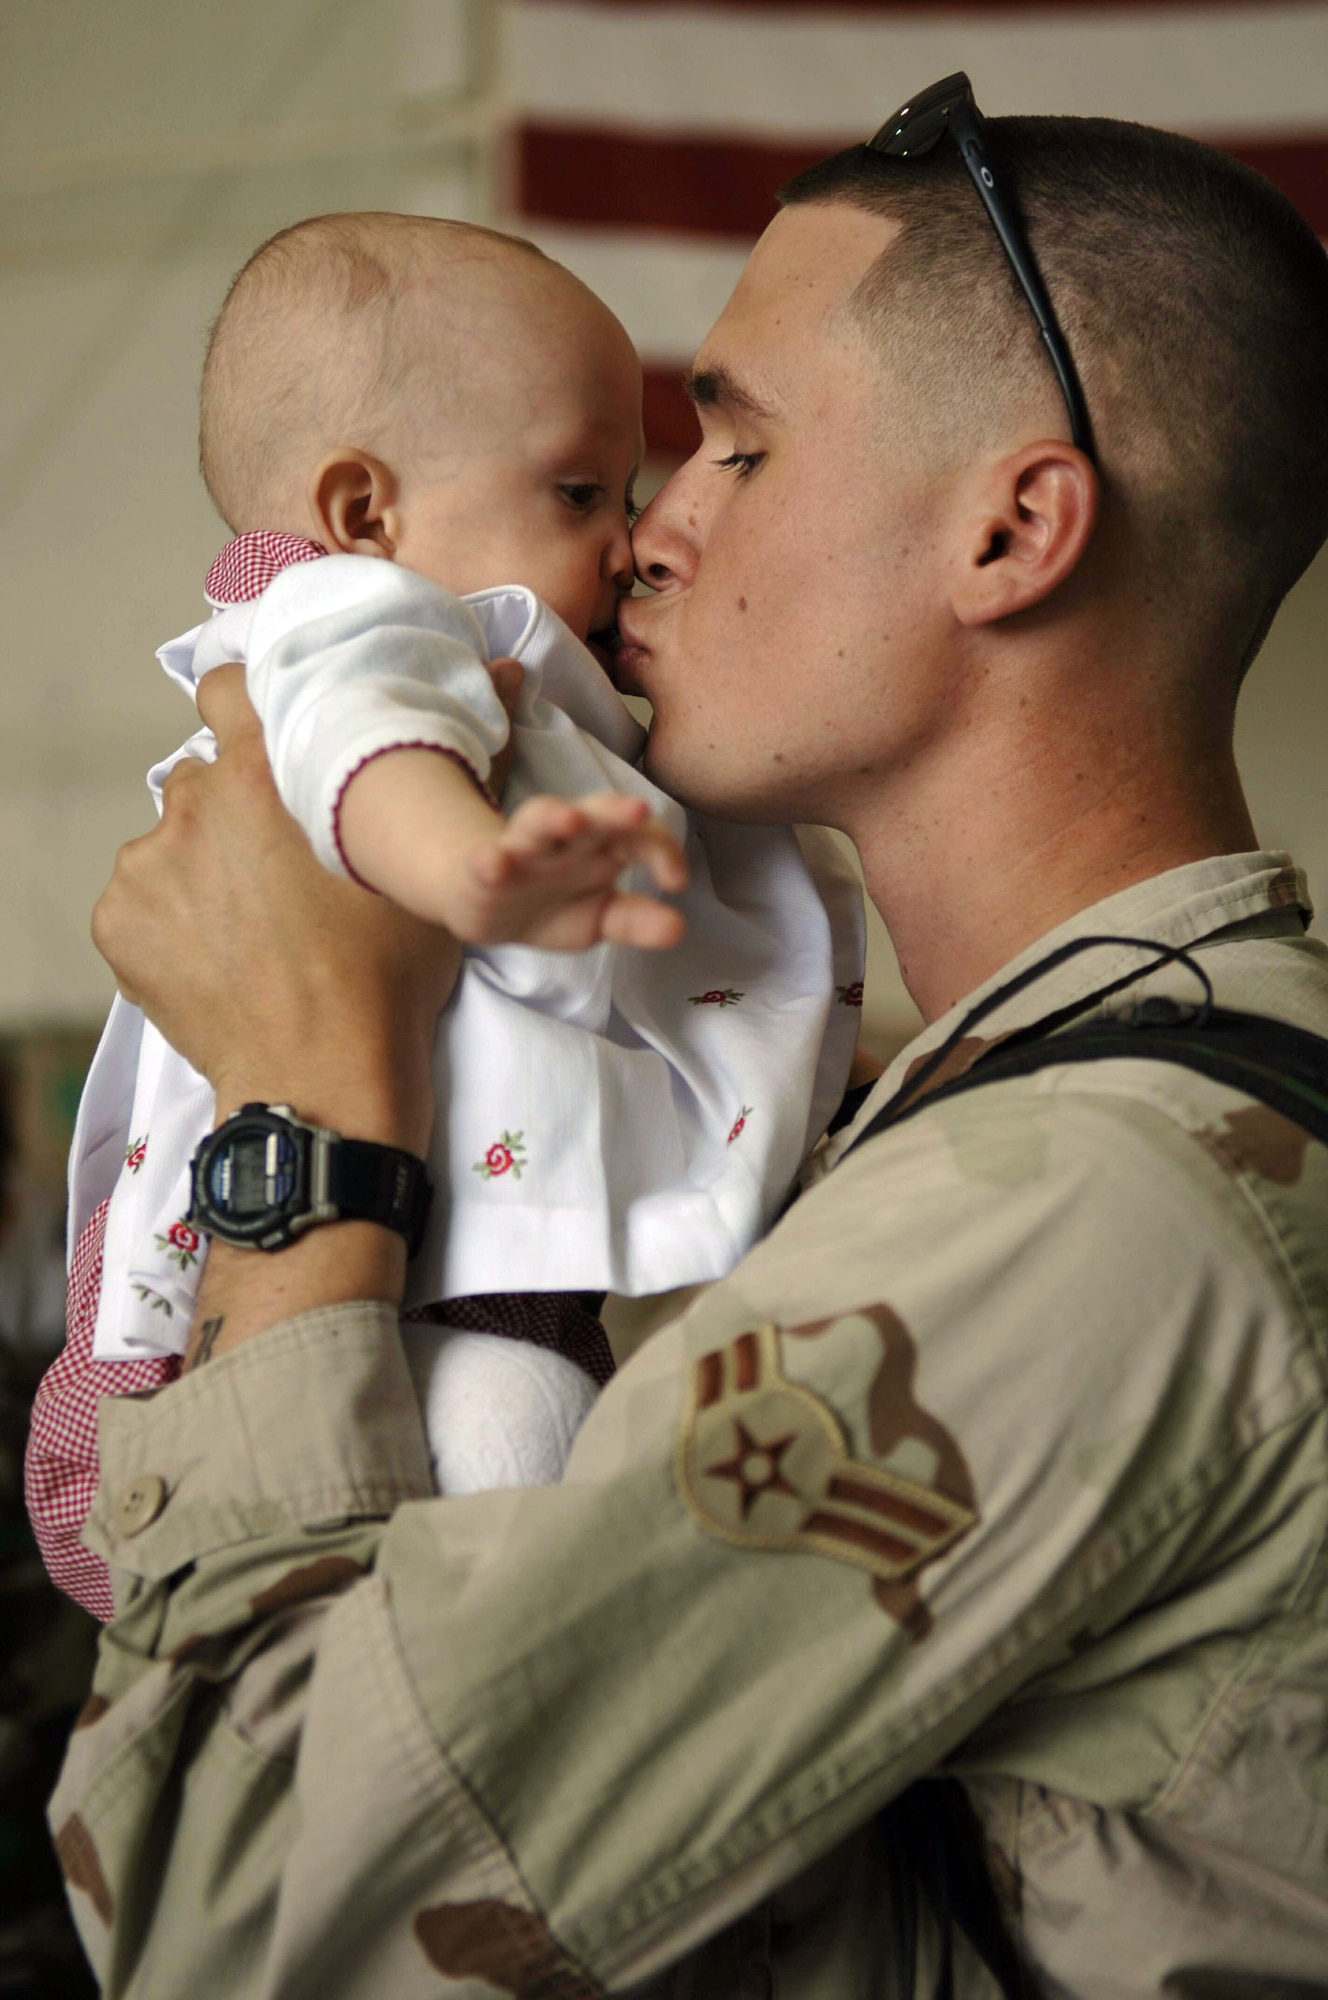 Airman 1st Class Daniel Wurdinger kisses his daughter, De`nae, as he returns to Davis-Monthan Air Force Base, Ariz., from his deployment in support of Operation Iraqi Freedom, Friday, March 17, 2006. Airman Wurdinger is with the 355th Security Forces Squadron.  (U.S. Air Force photo/Senior Airman Christina D. Ponte)